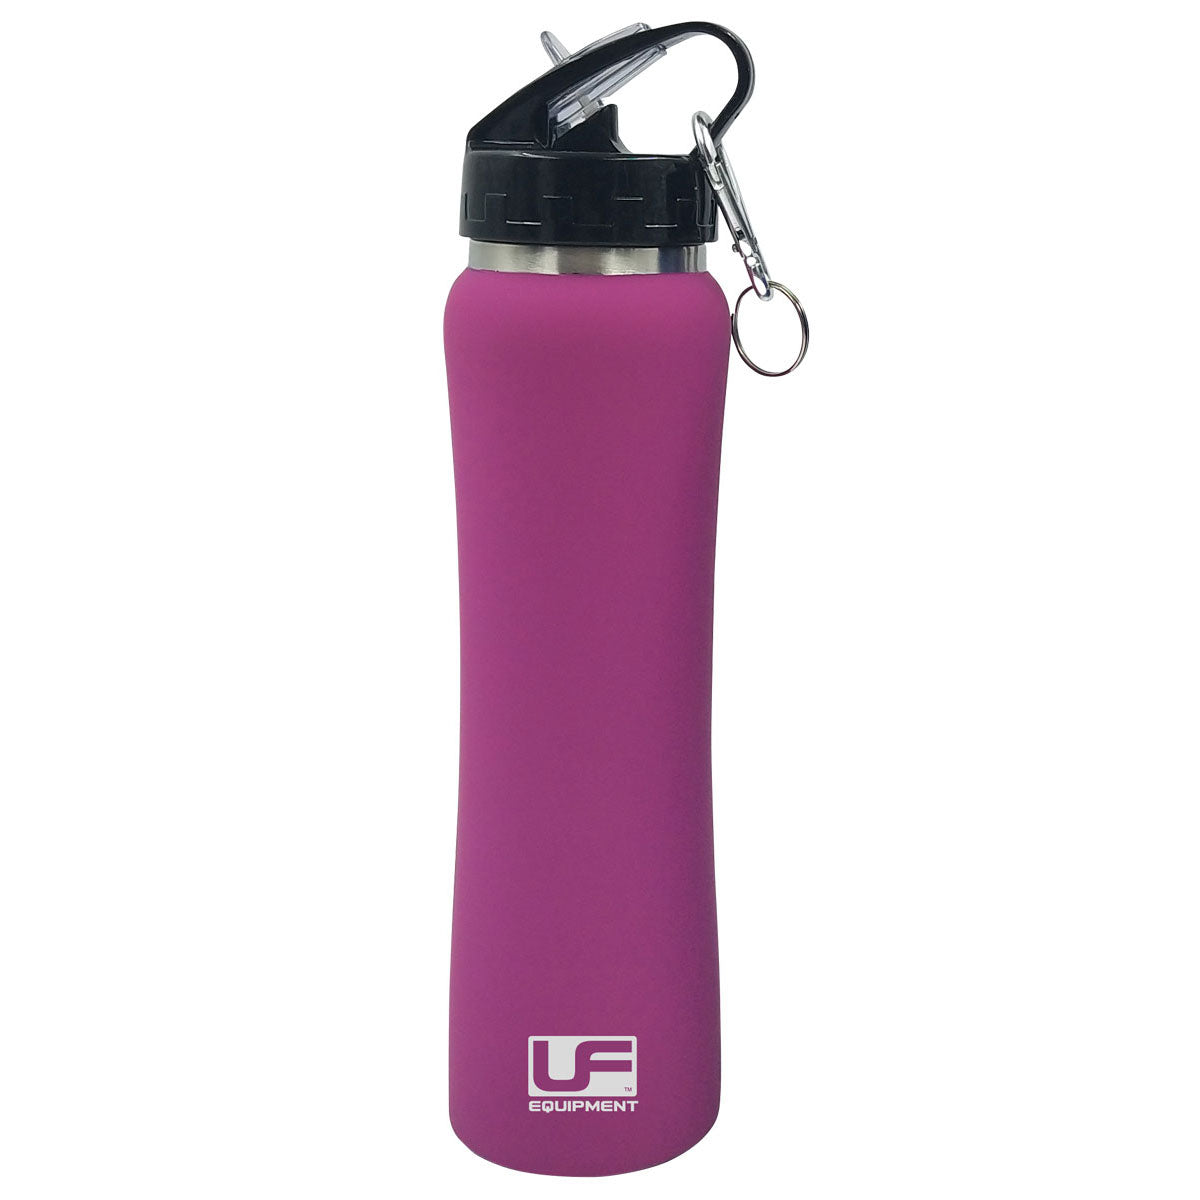 UFE Cool Insulated Stainless Steel Water Bottle - 500ml